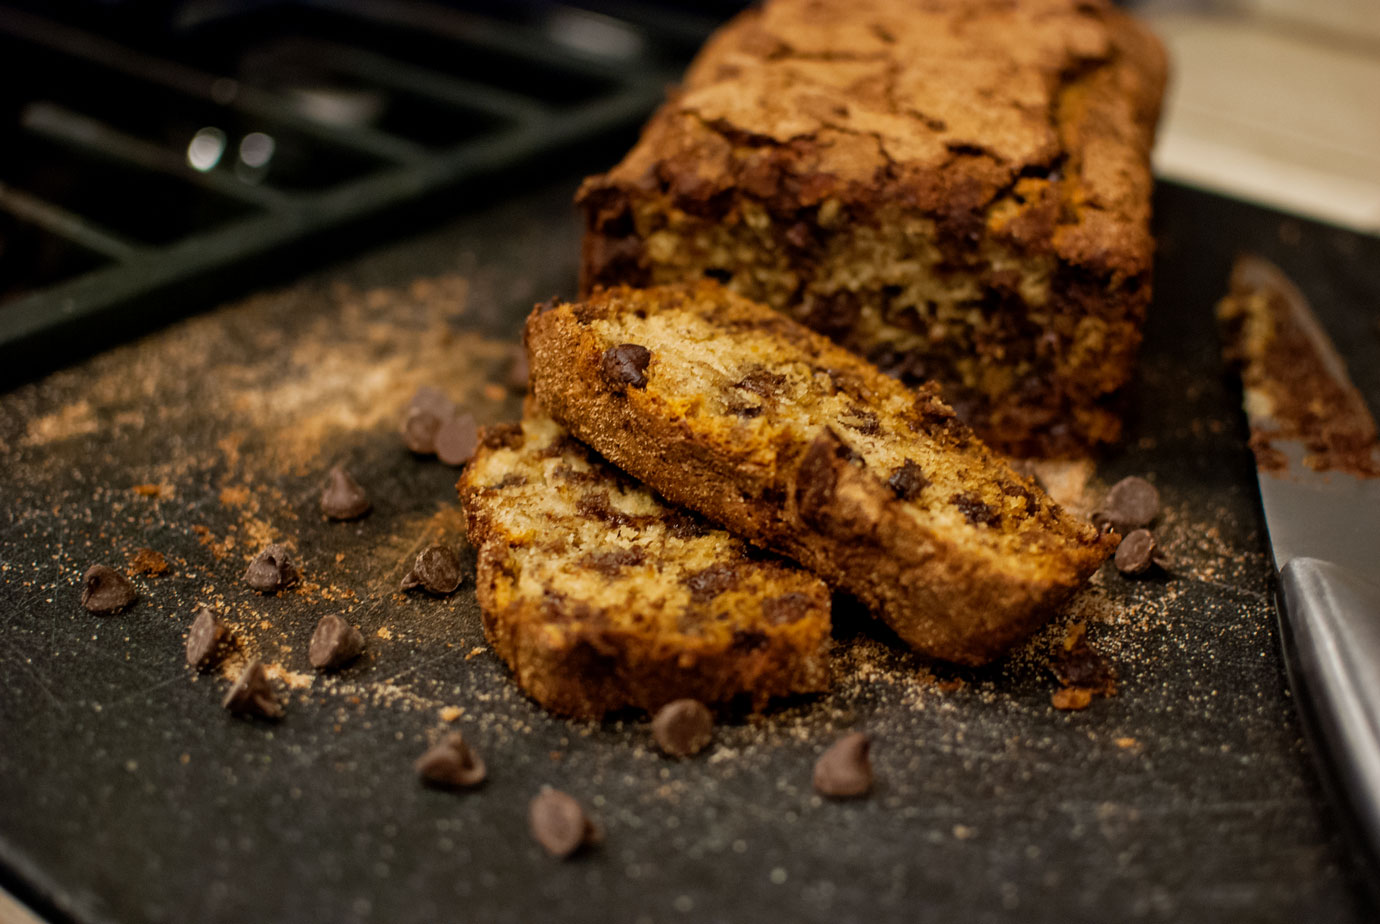 Slices Of Banana Bread With Chocolate Chips